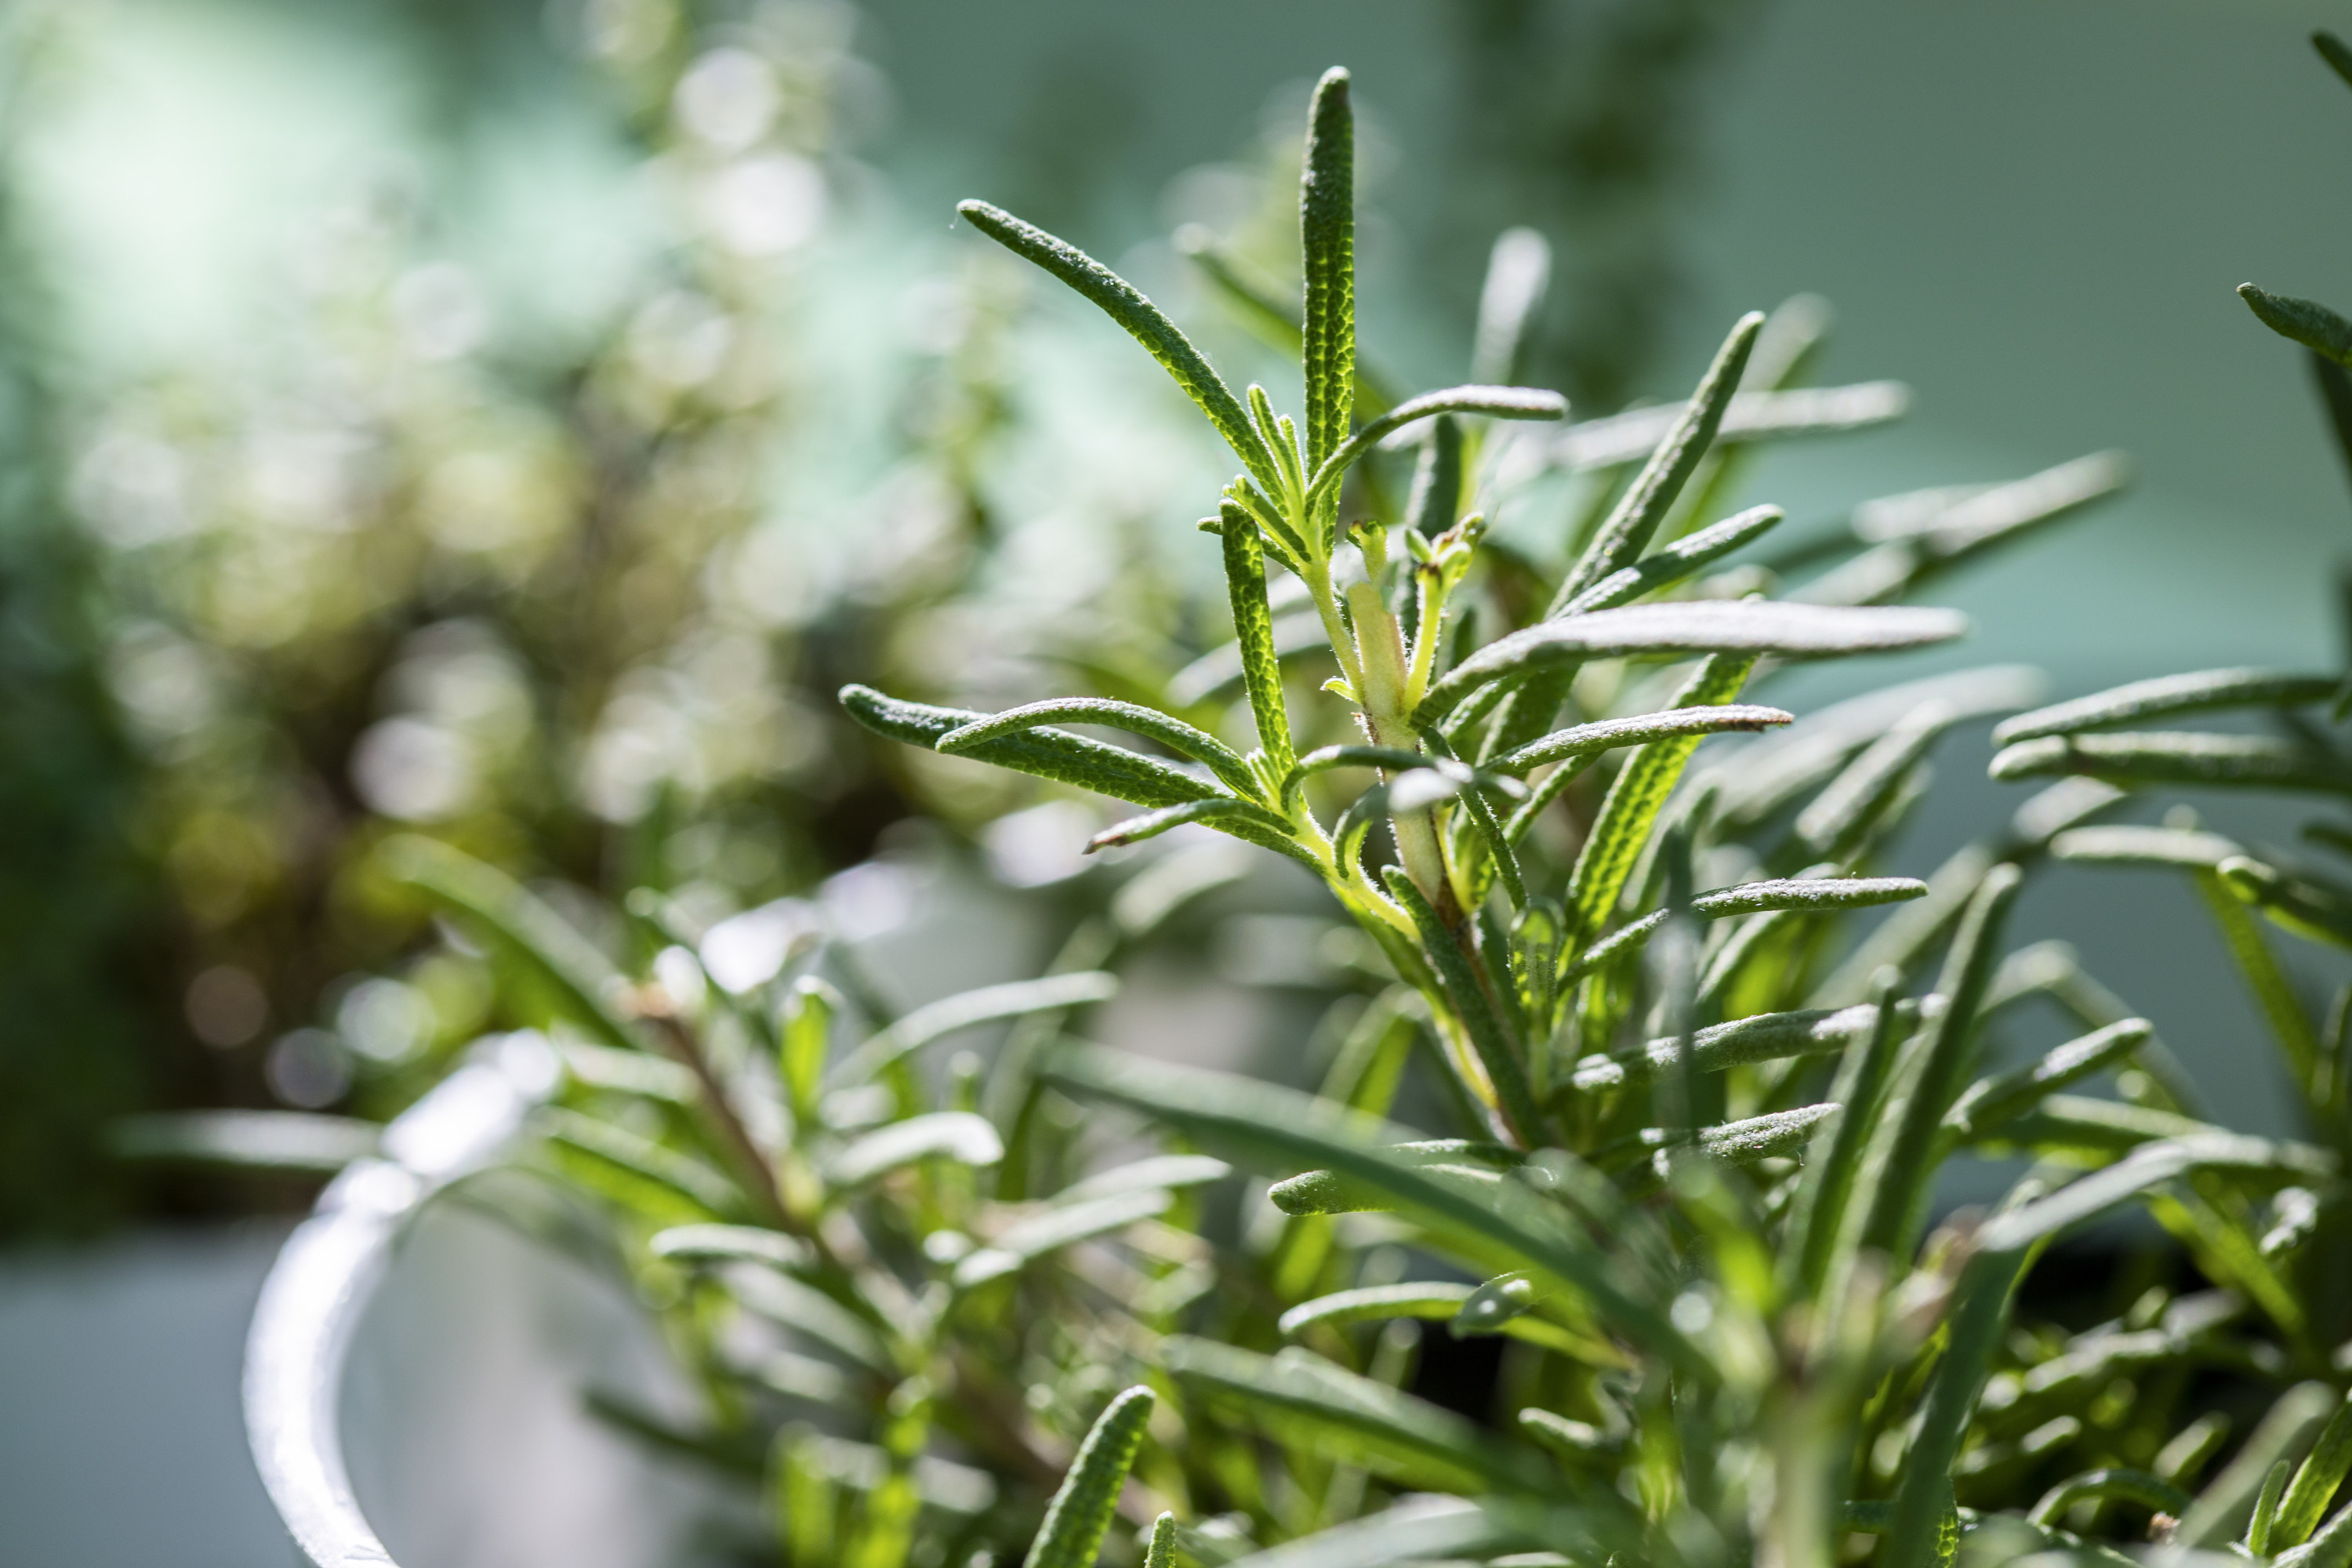 A close-up image of a rosemary plant